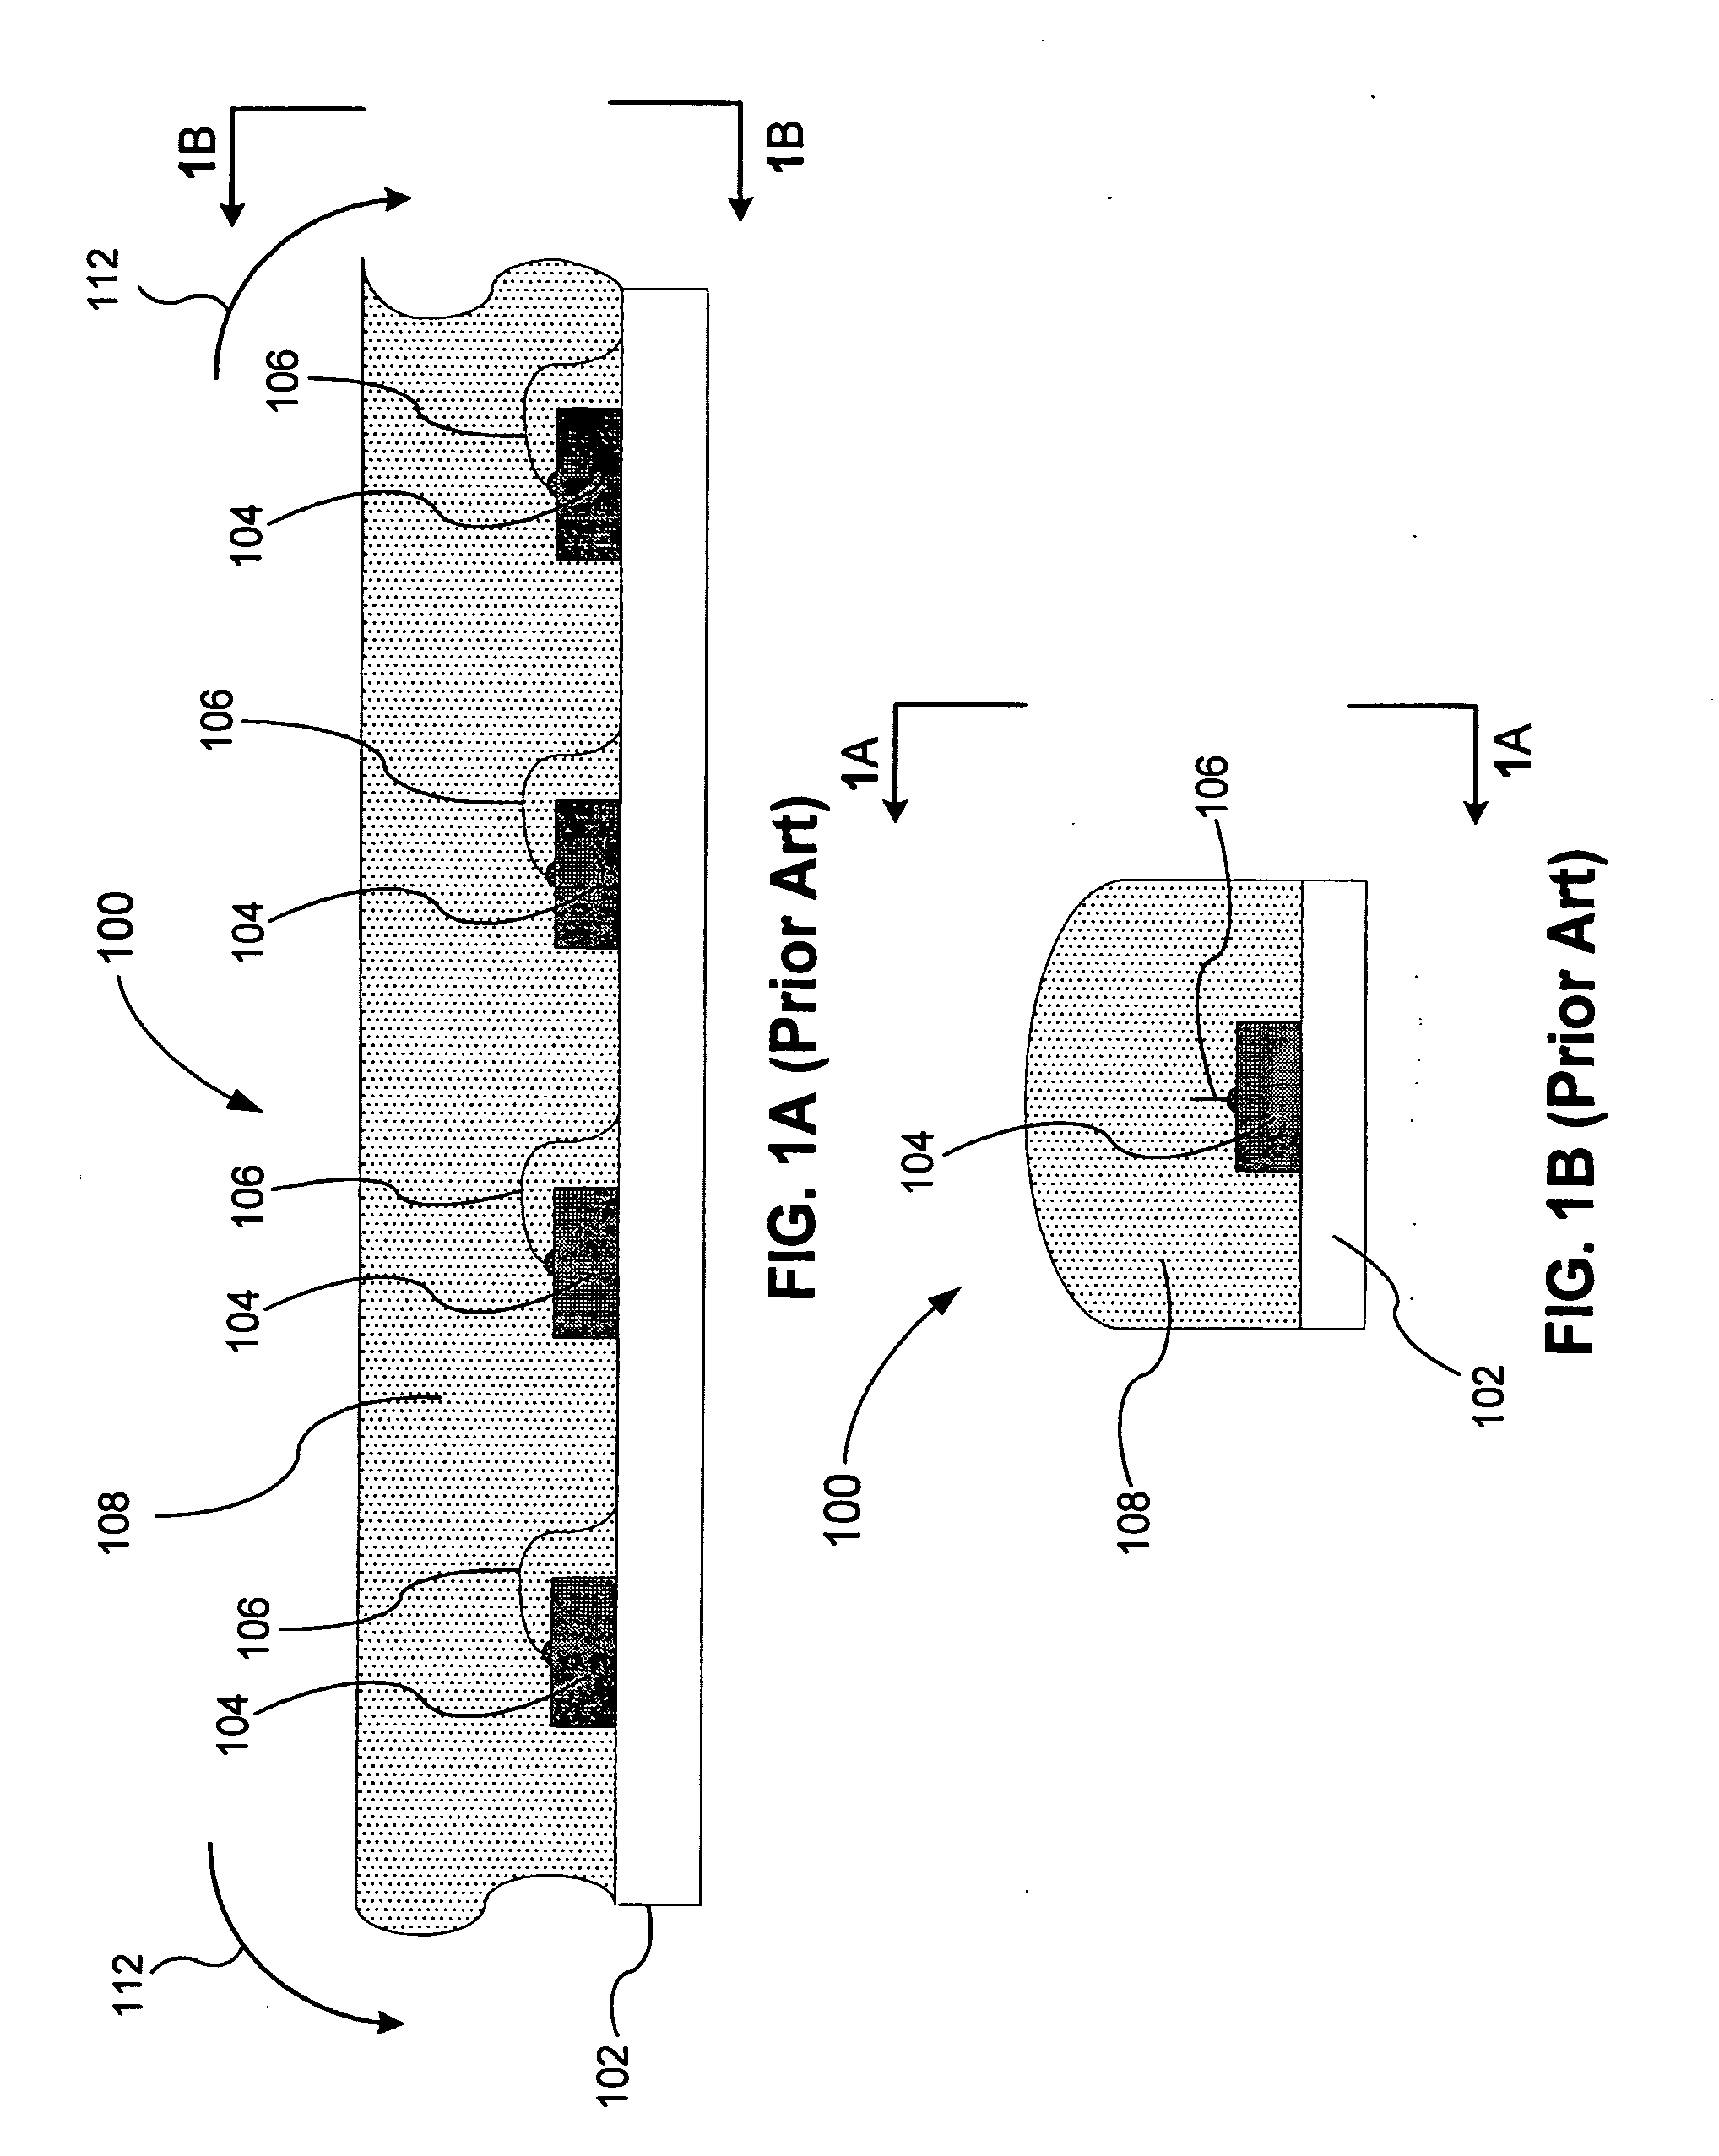 Flexible circuits having improved reliability and thermal dissipation